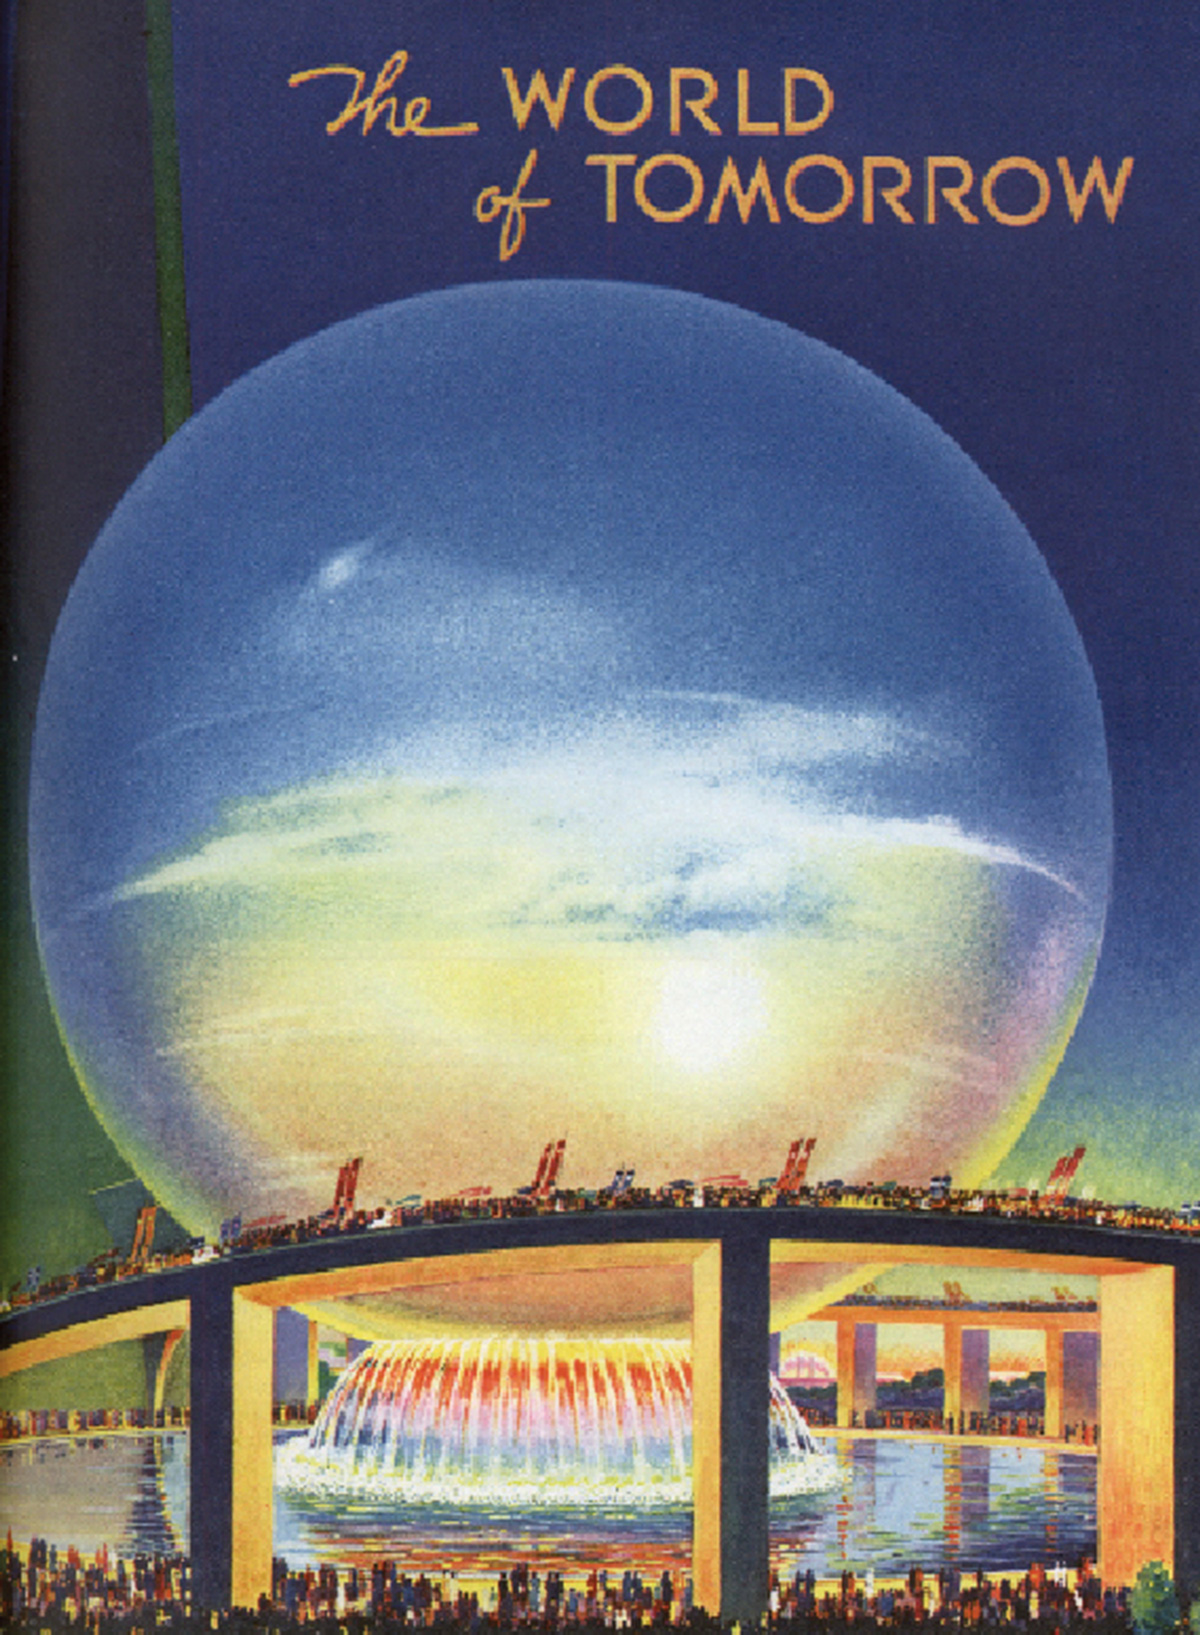 An illustration of the 180-foot tall Perisphere, a giant ball housing a model of a Utopian garden city of the future called “Democracity.”